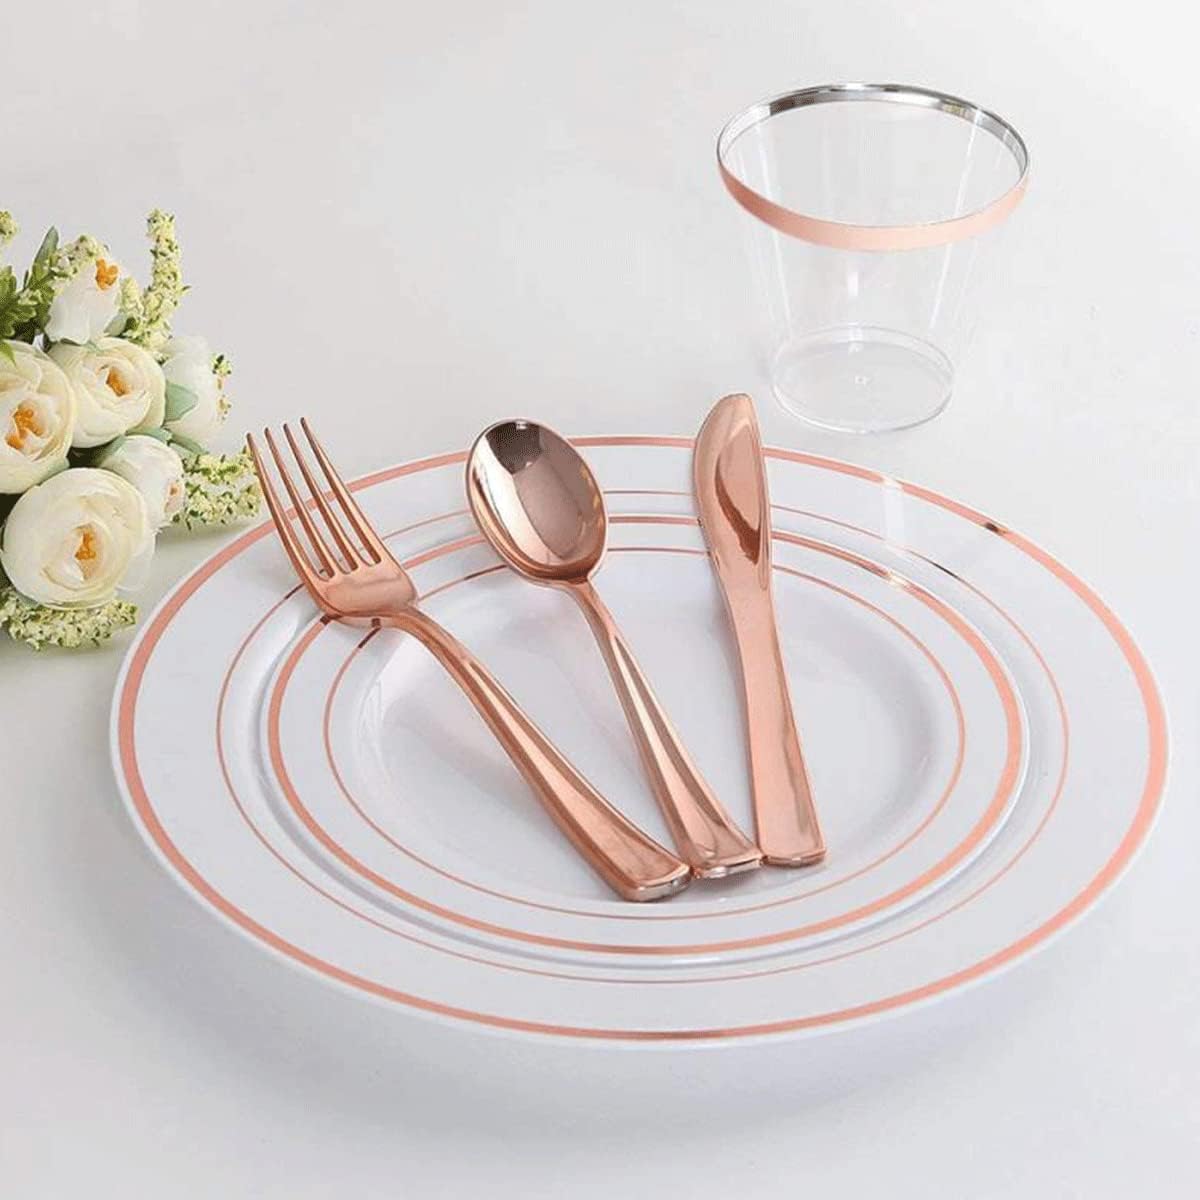 Beauenty 150Pcs Rose Gold Party Supplies Party Tableware Party Disposable Plastic Cutlery Set, Party Supplies Plate, Spoon,cup,Cutlery-25 Guests